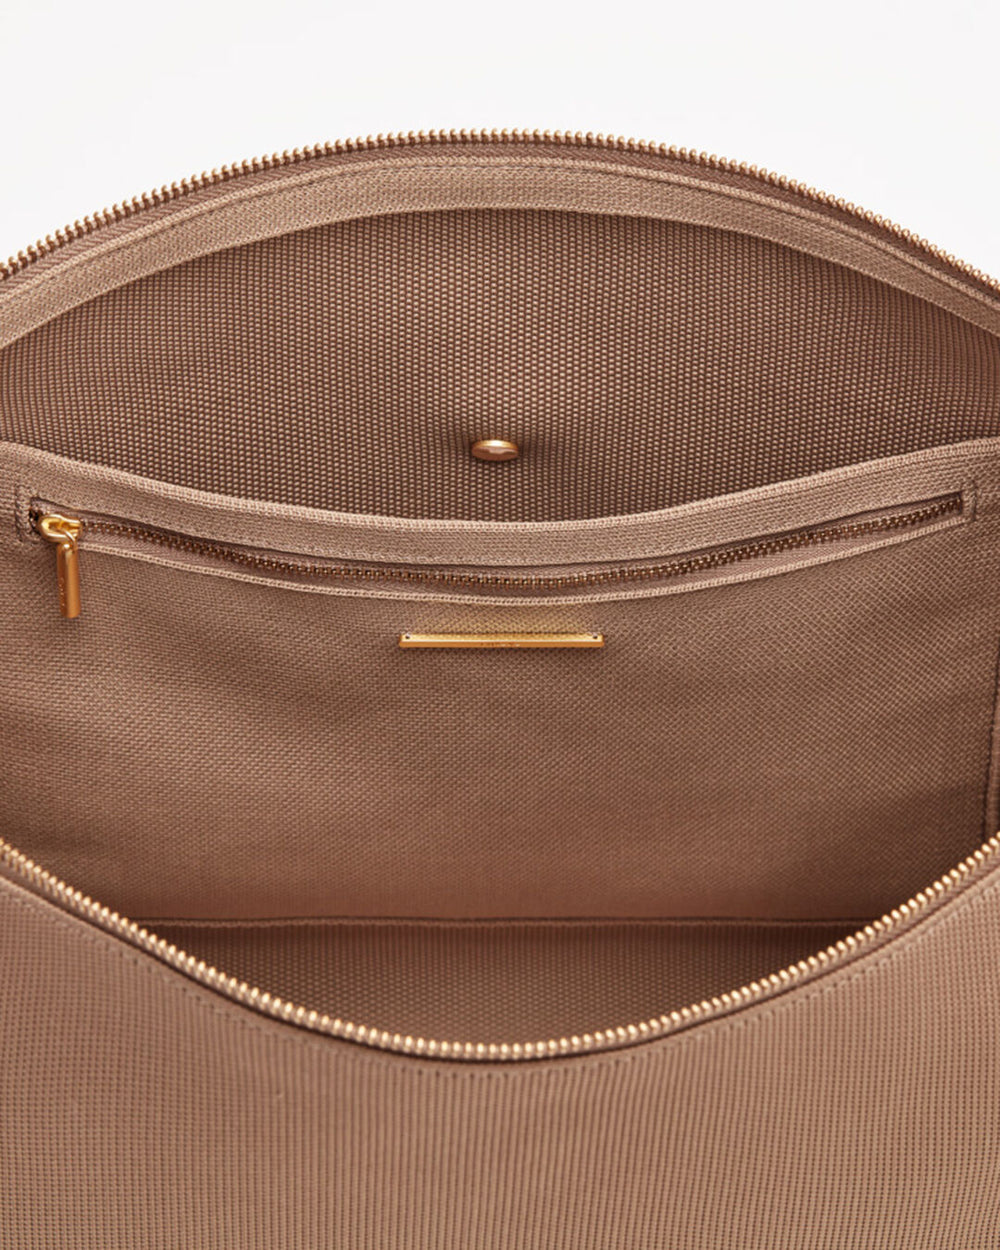 Open bag showing interior compartments and zippers.